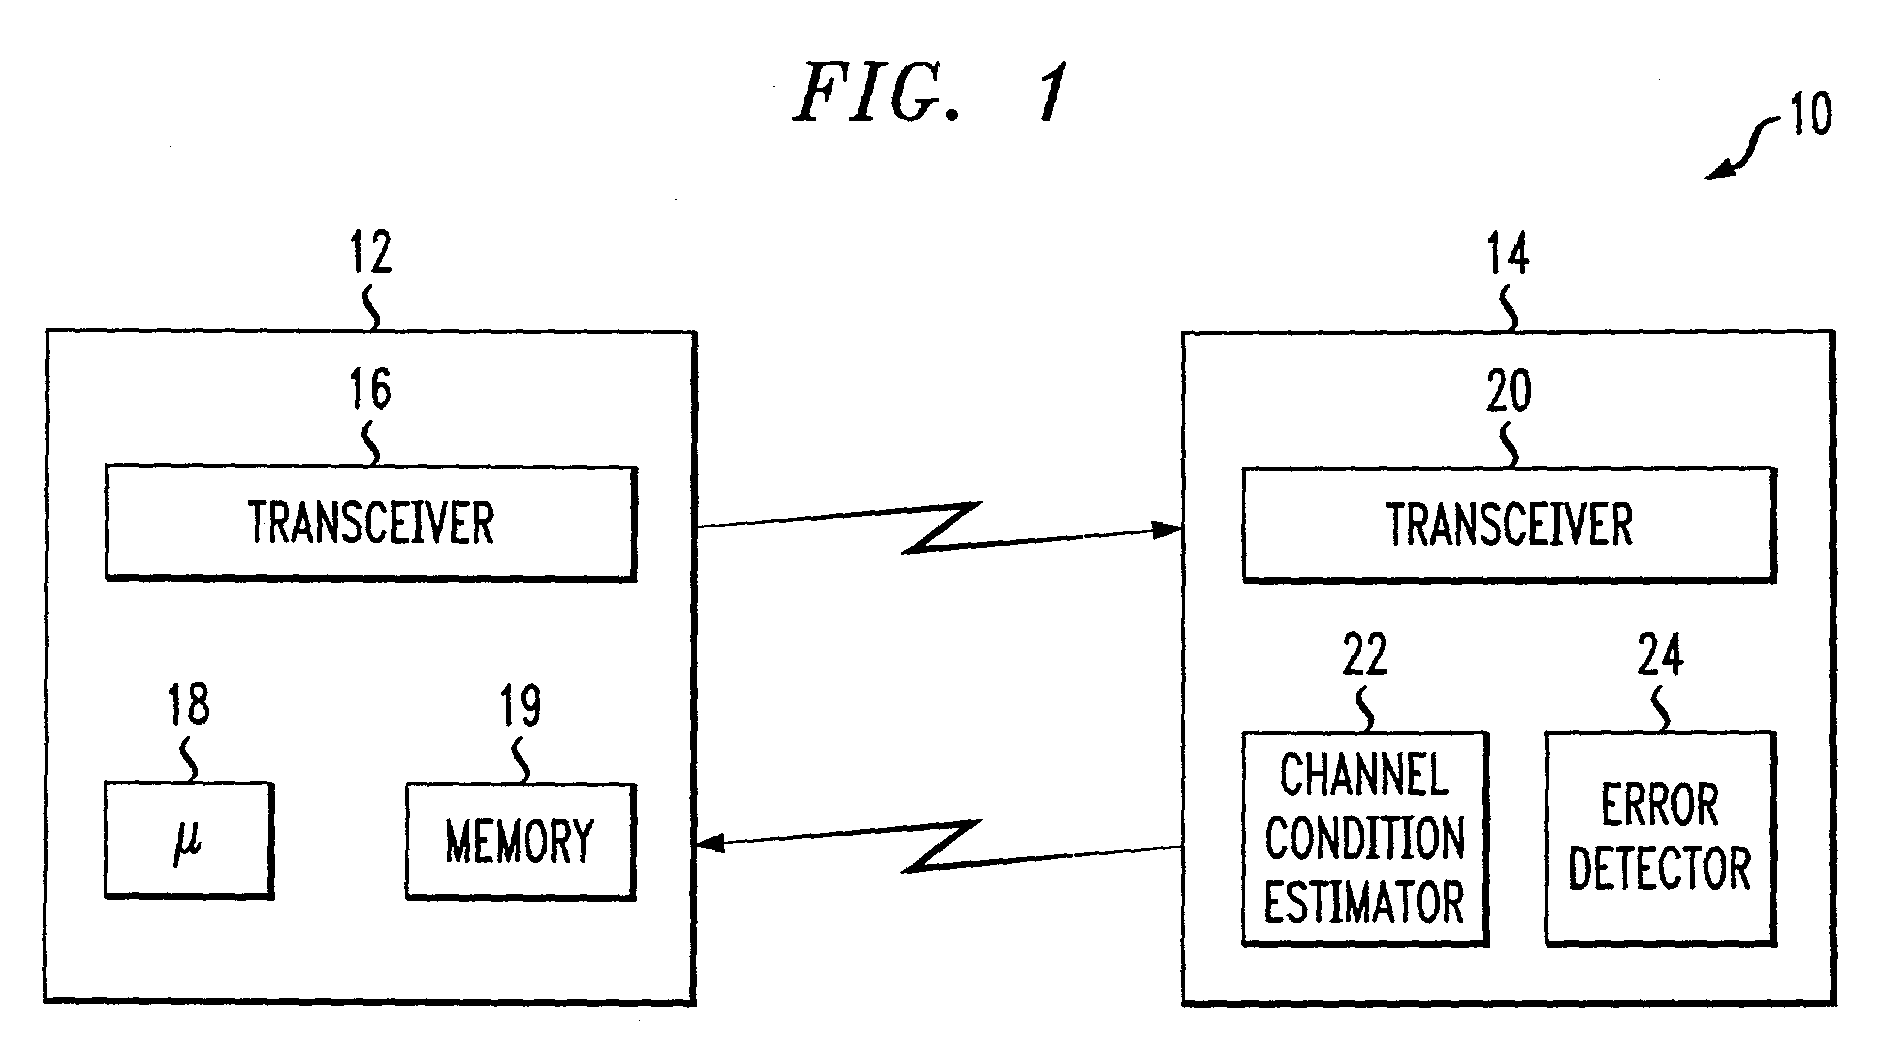 Multi-channel adapative quality control loop for link rate adaptation in data packet communications